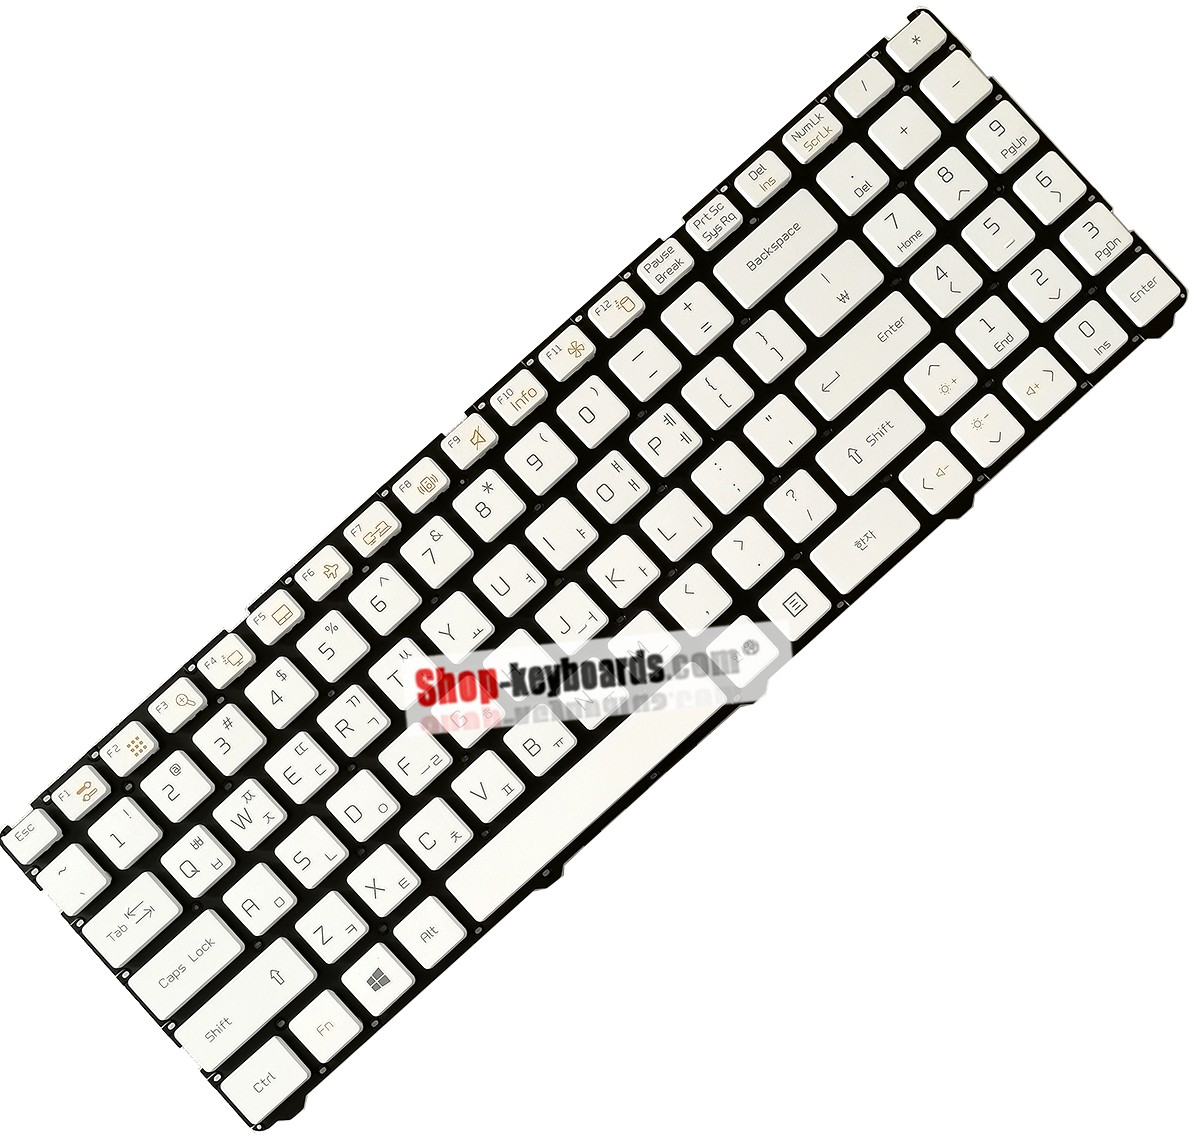 LG MP-12K73DN-9208 Keyboard replacement